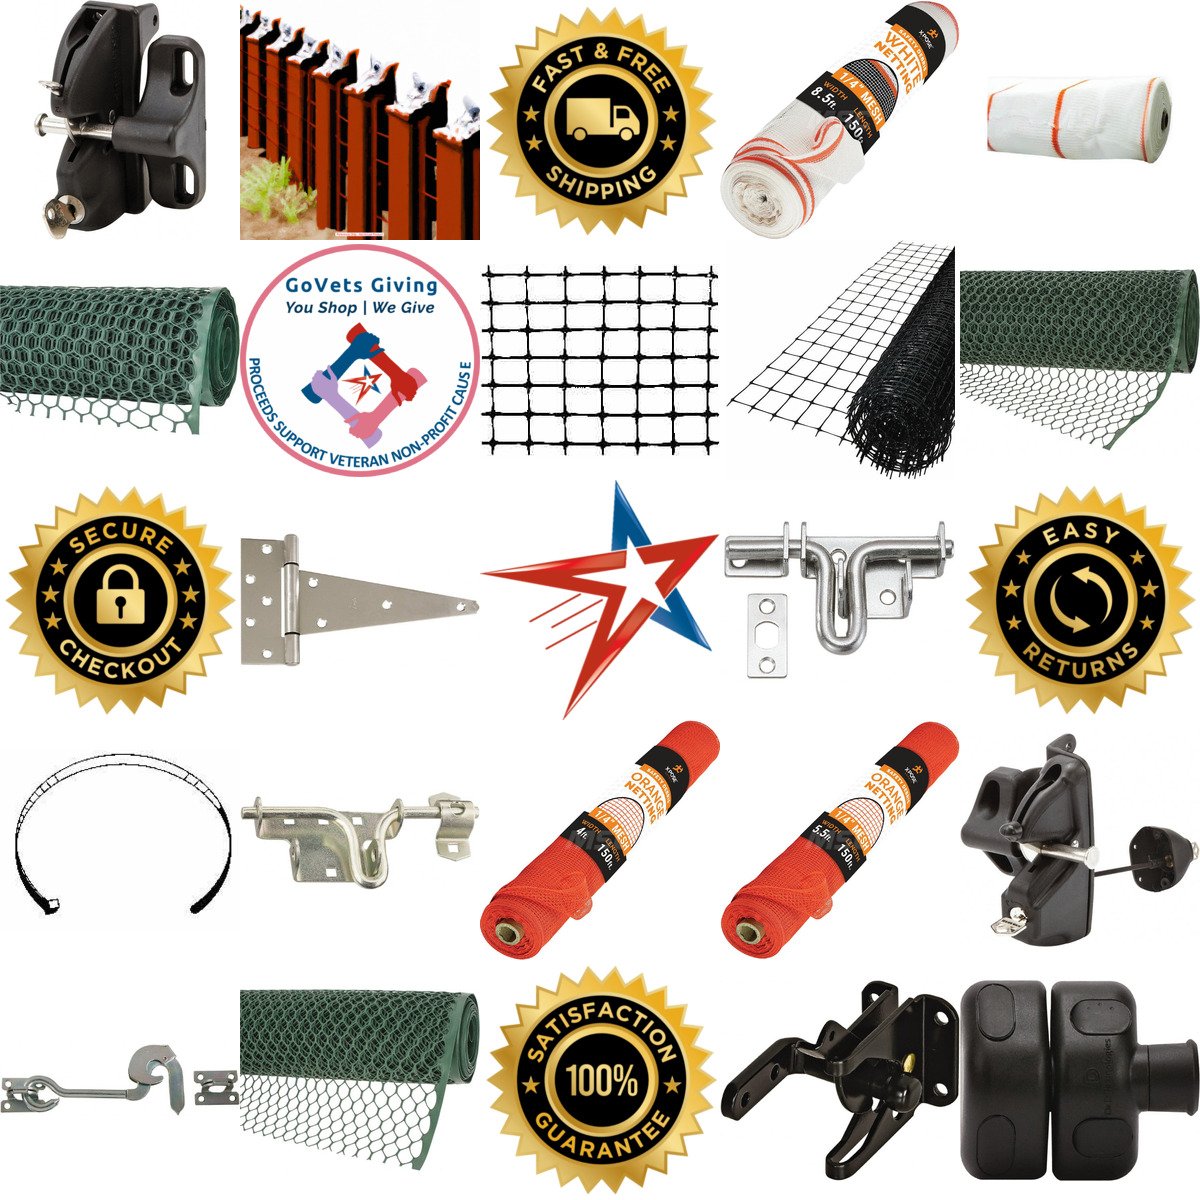 A selection of Gate and Fence Hardware products on GoVets